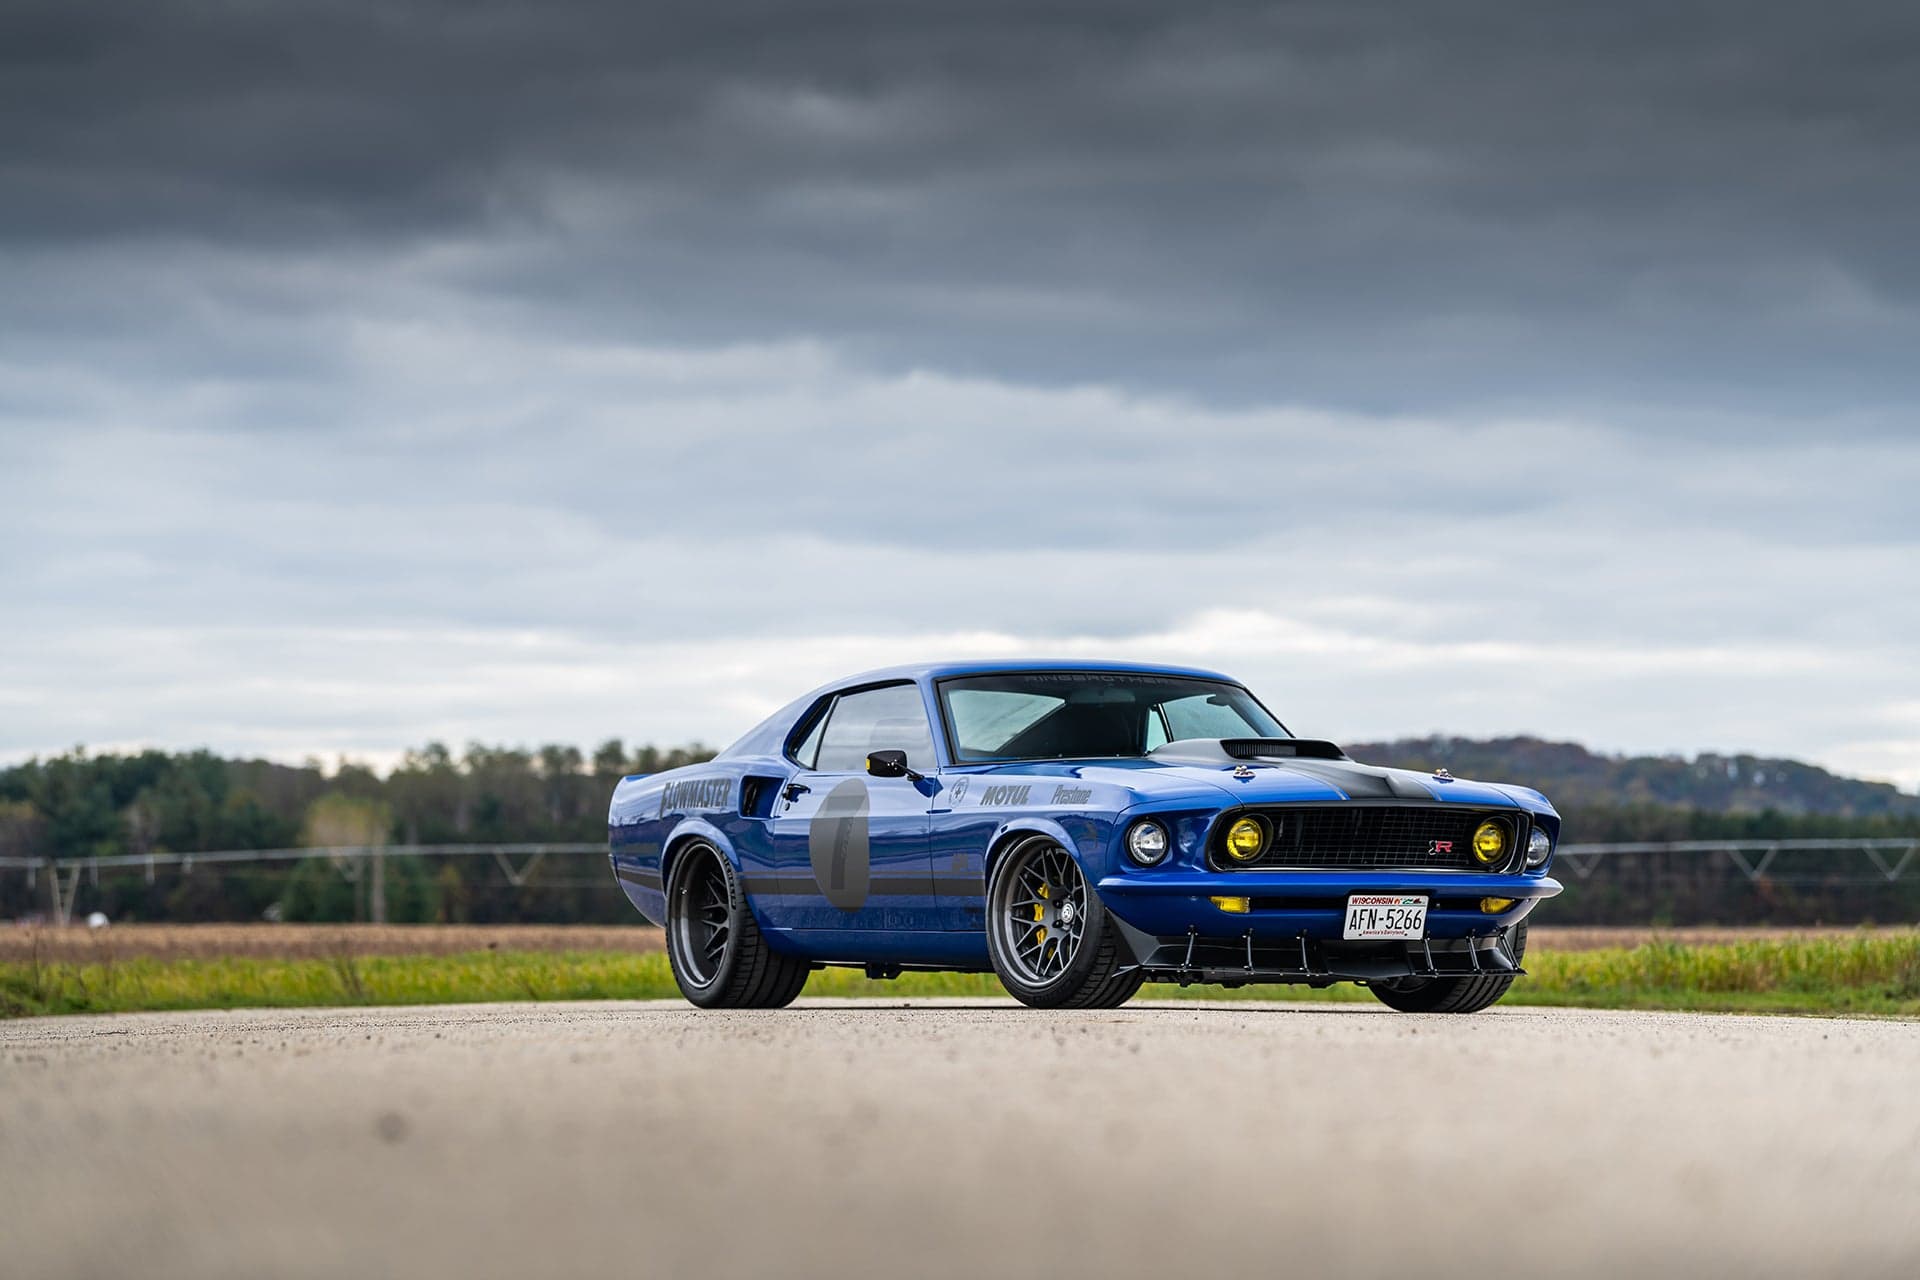 The Ringbrothers Built a 700 HP 1969 Ford Mustang Mach 1 “UNKL” To Honor Their Uncle